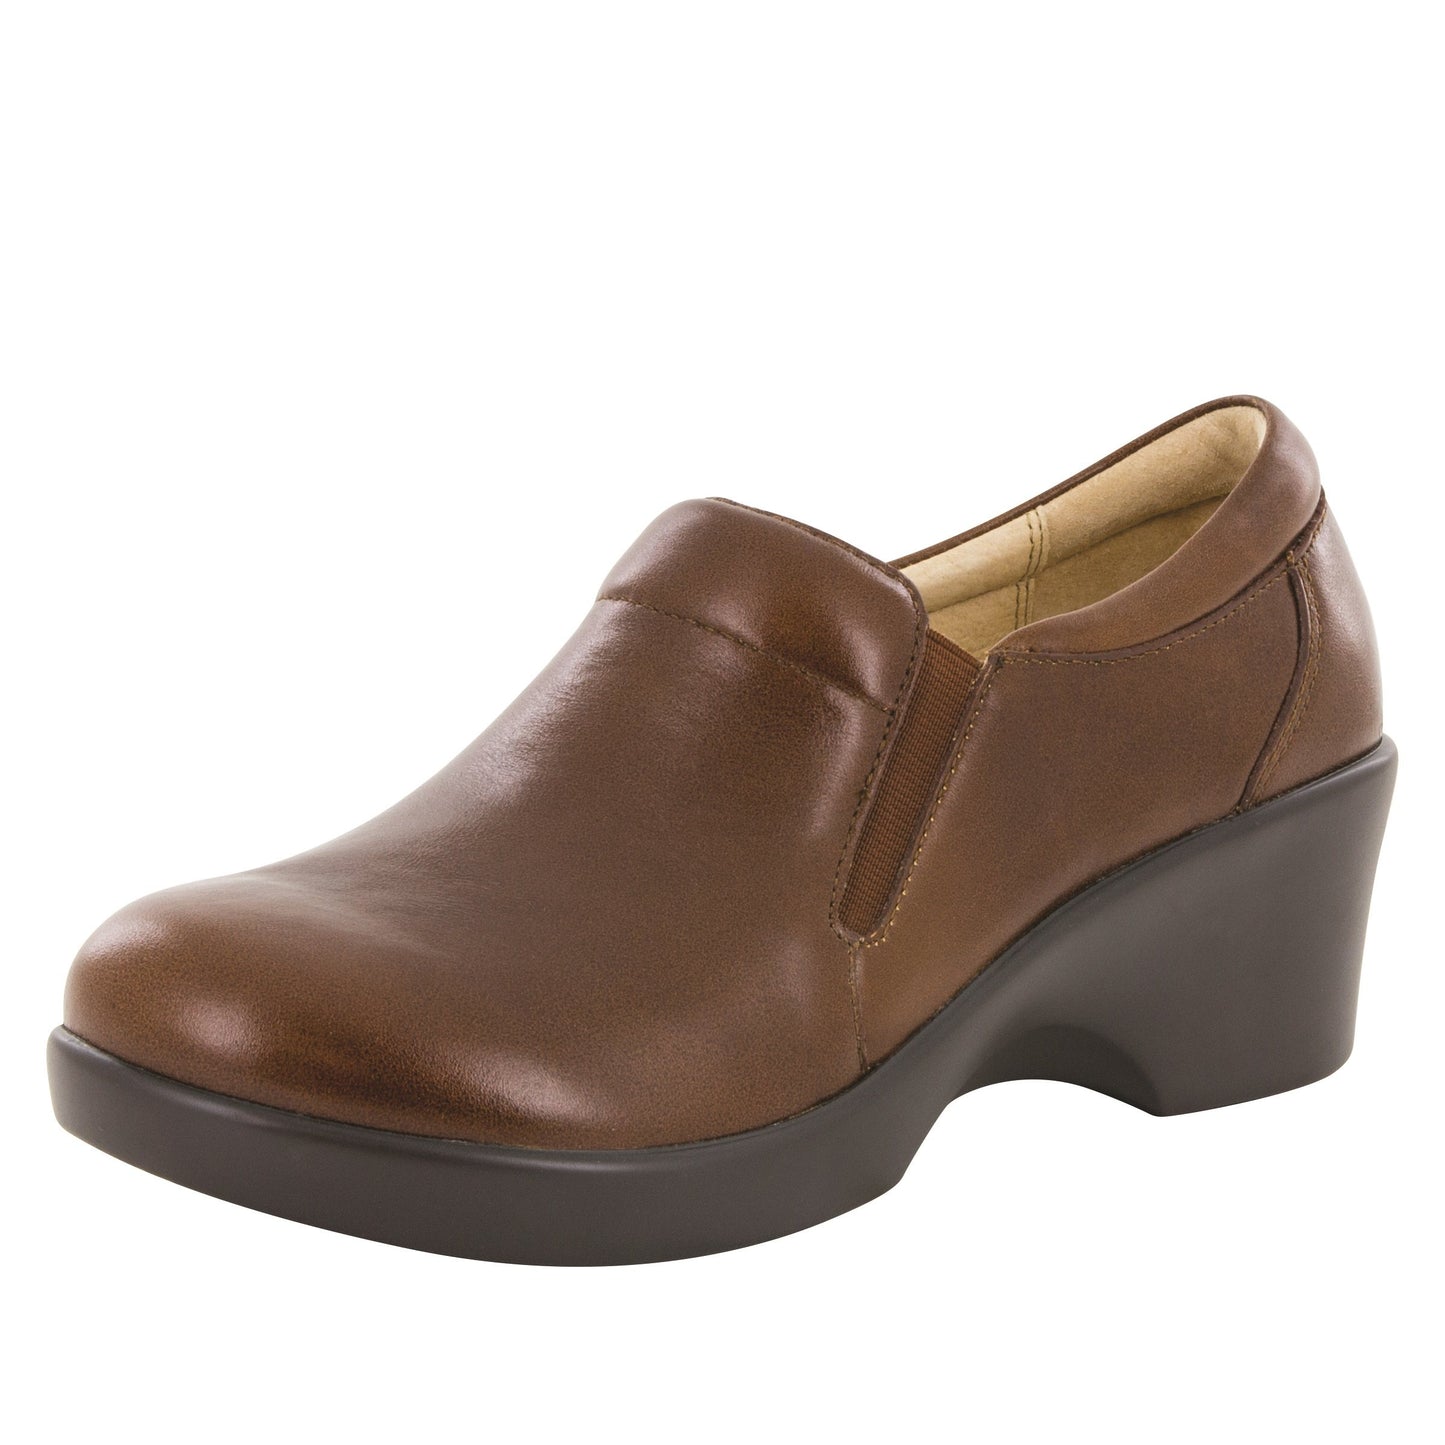 Alegria Sale Shoe Size 36 Eryn in Chestnut Luster at Parker's Clothing and Shoes.